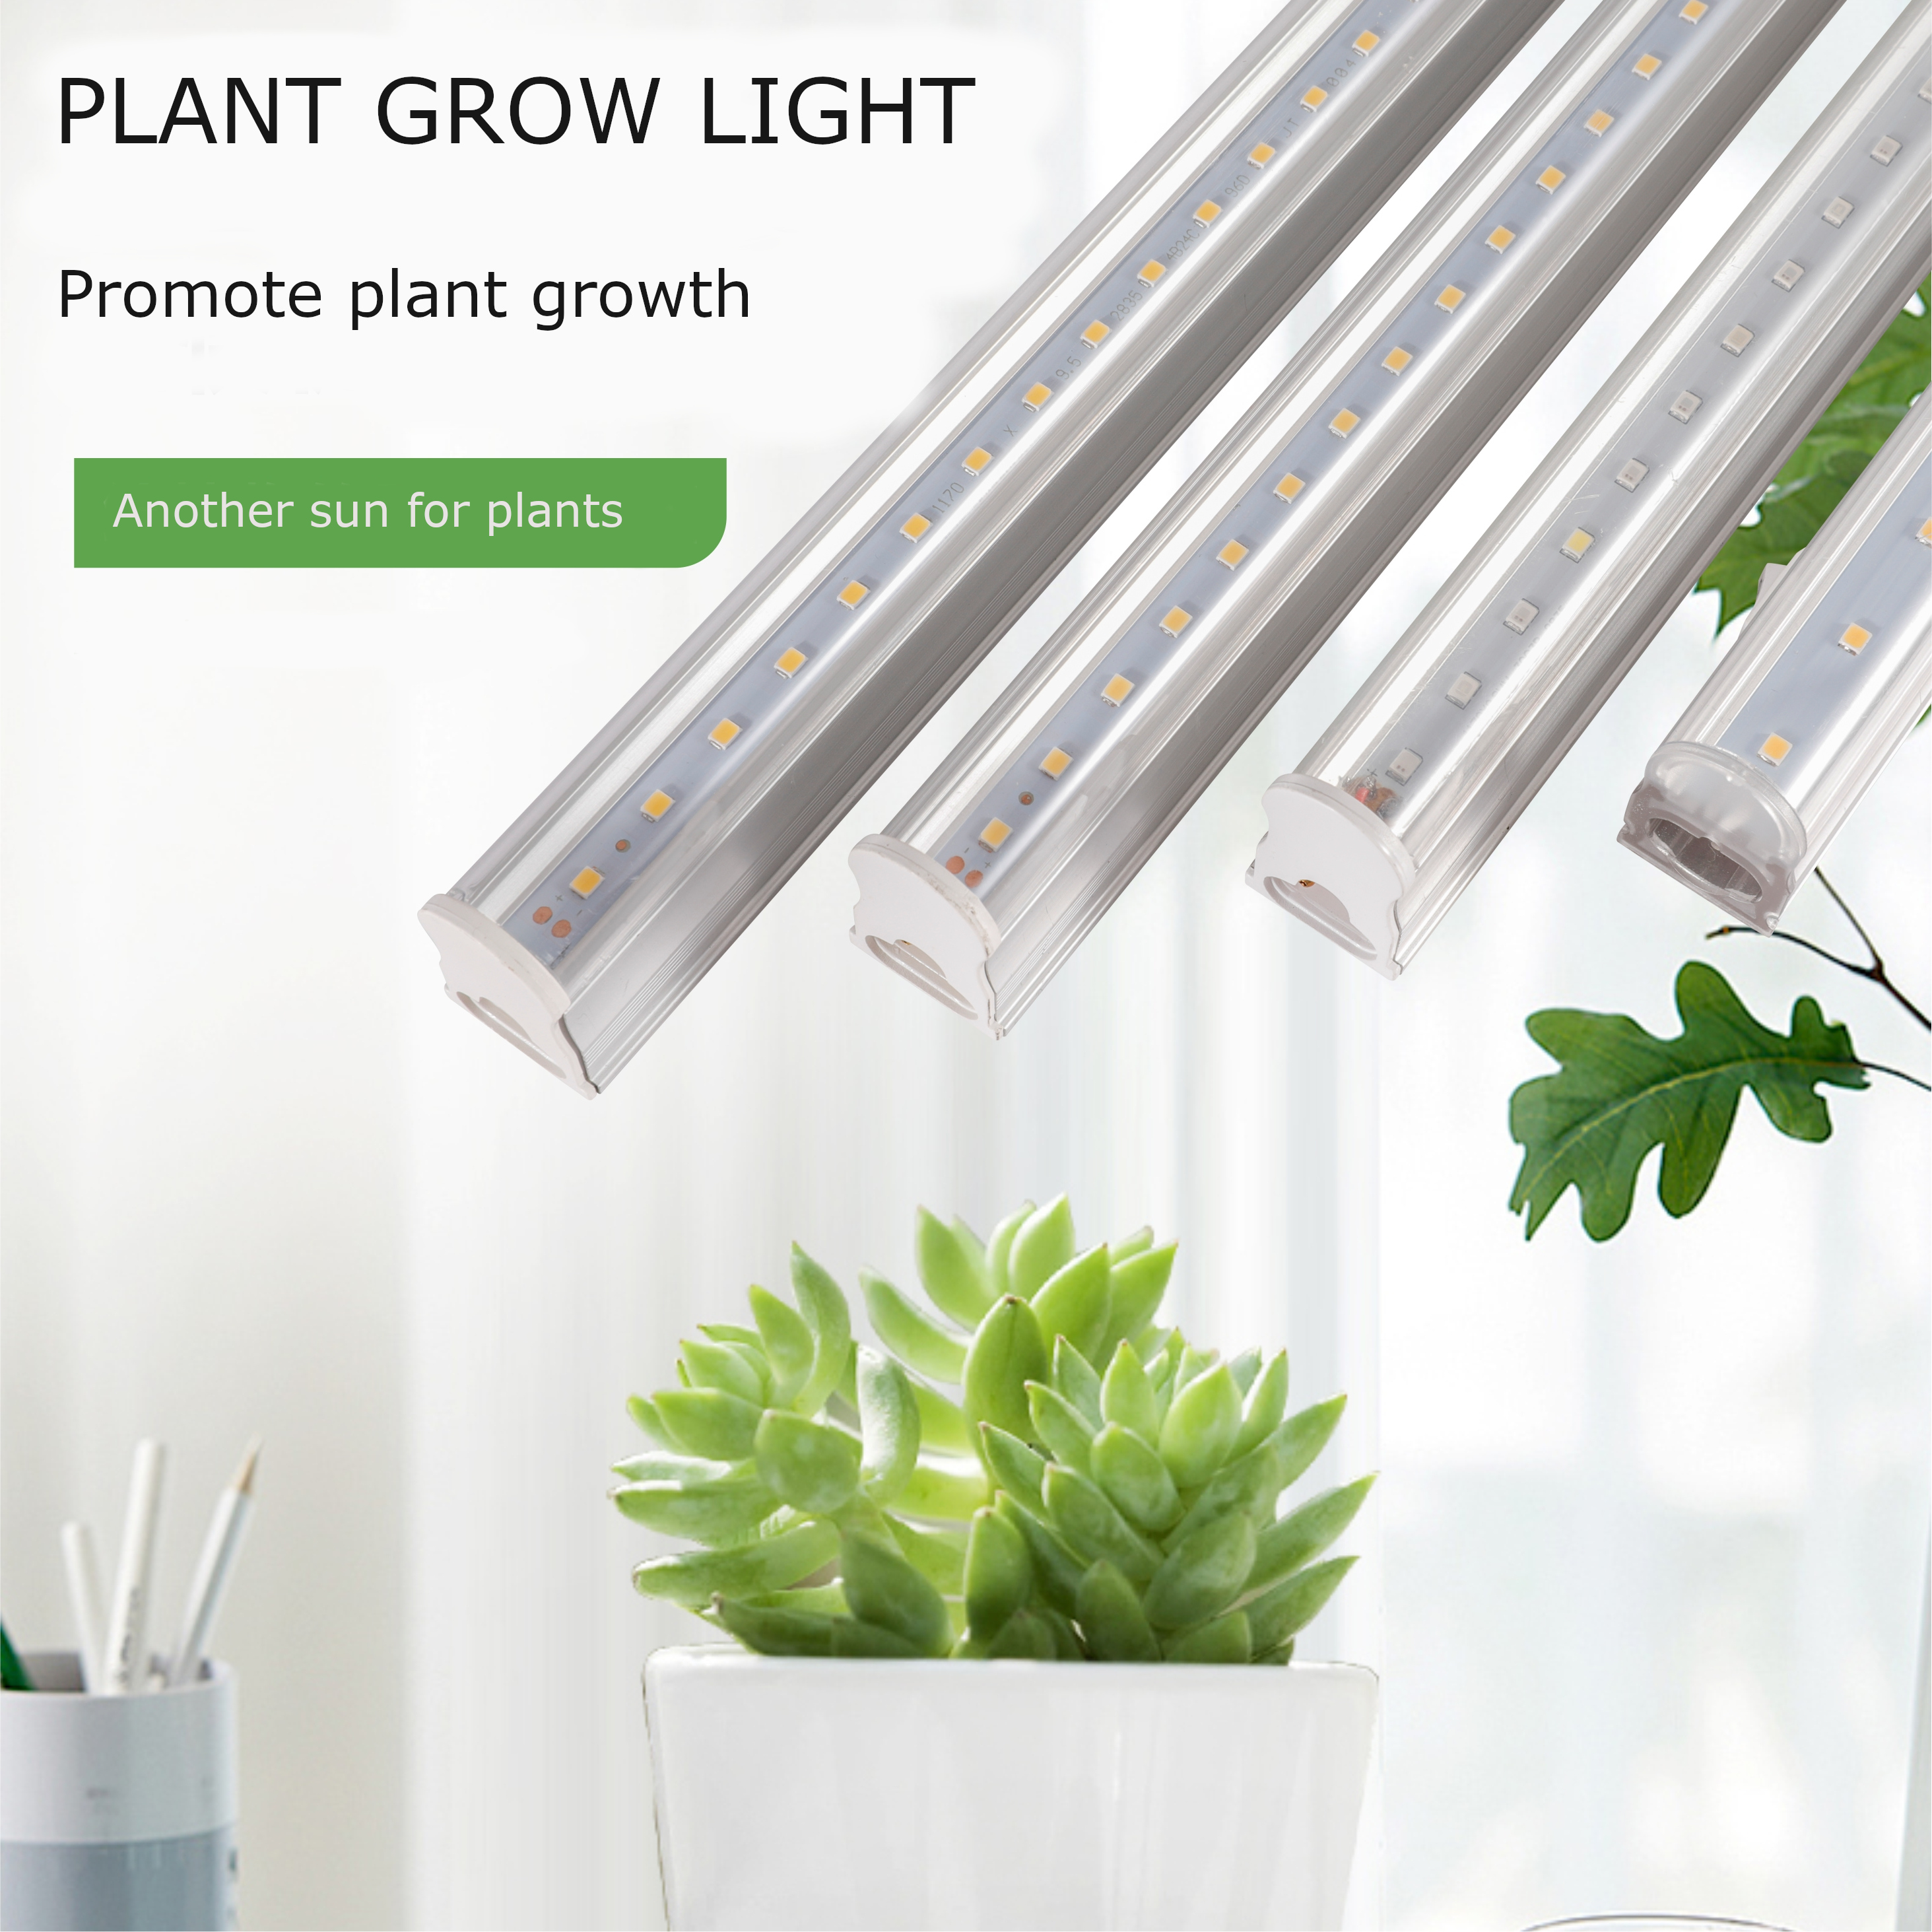 Led  plant grow tube light T5 600mm with New Diodes & IR Lights Full Spectrum Veg Bloom Growing Lamps for Indoor Plants Seeding Flower Led Plant Light Fixture